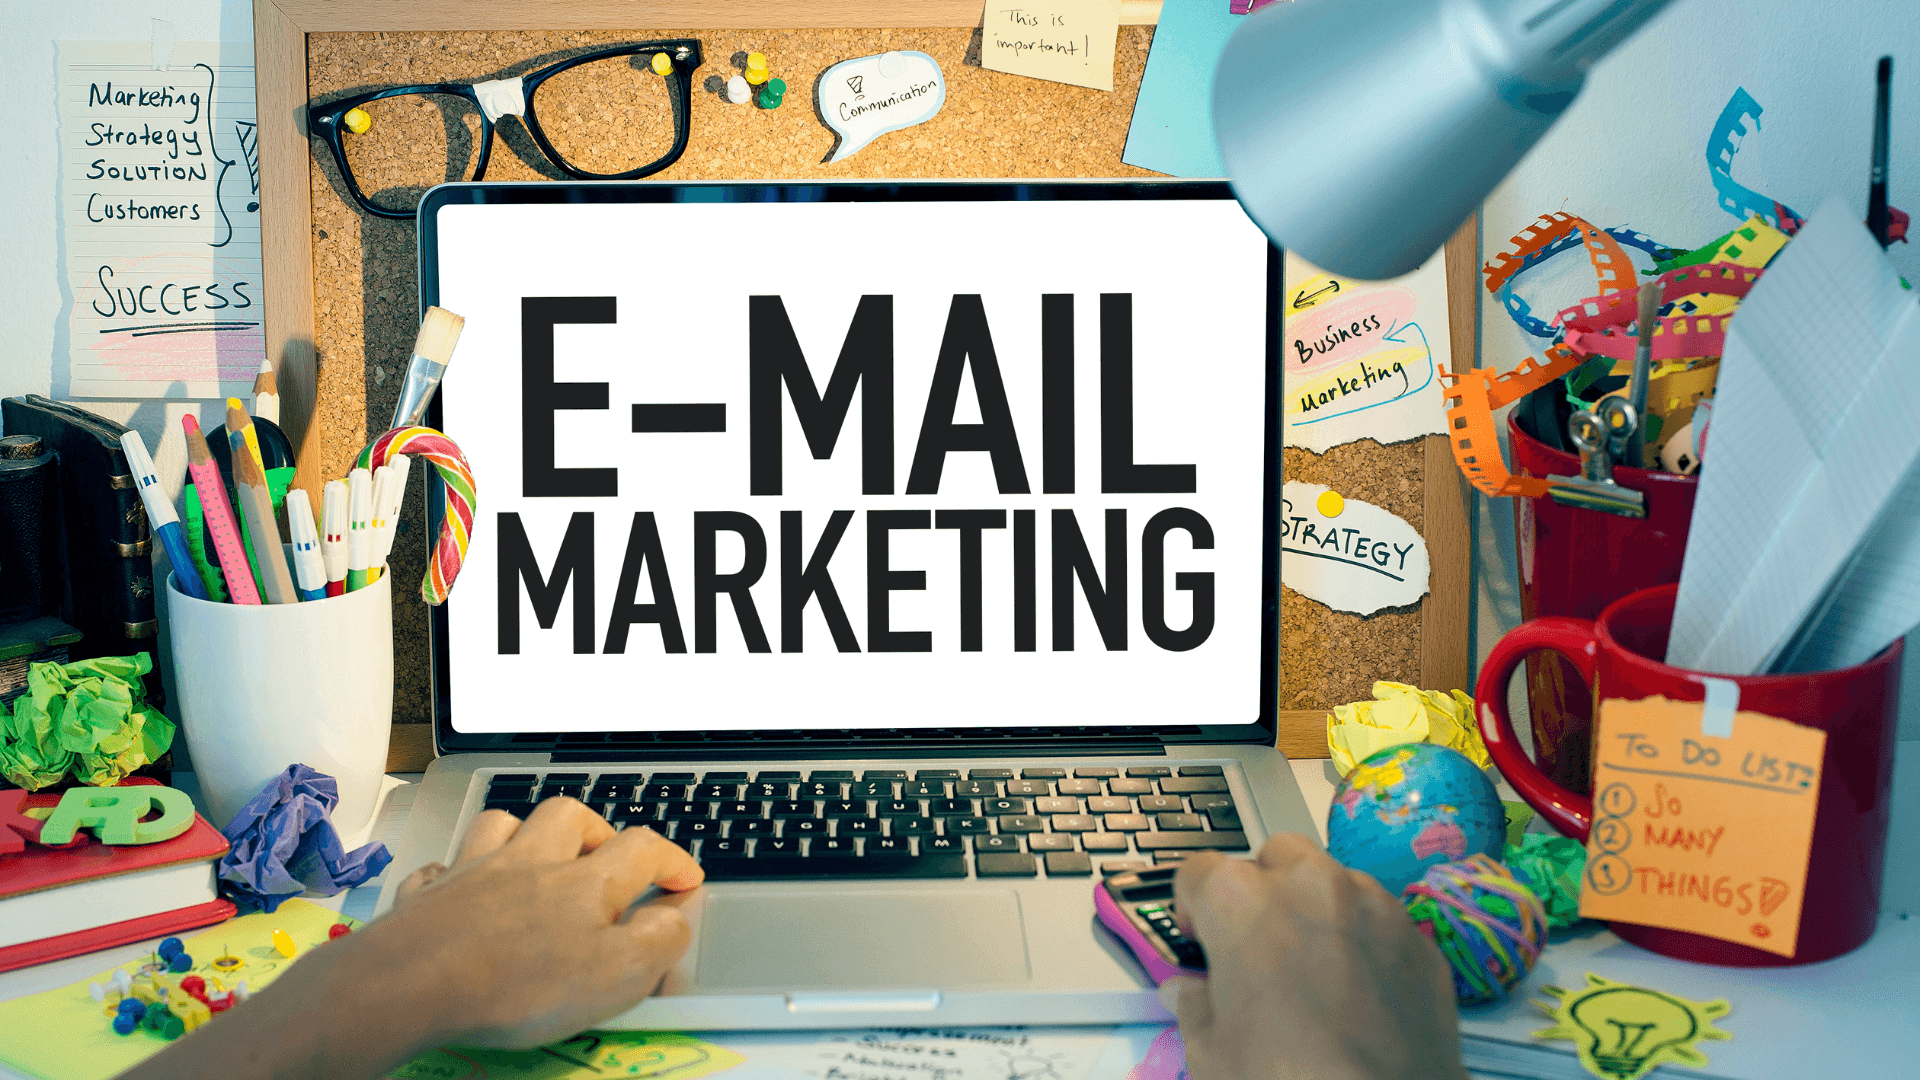 Free Email Marketing Services